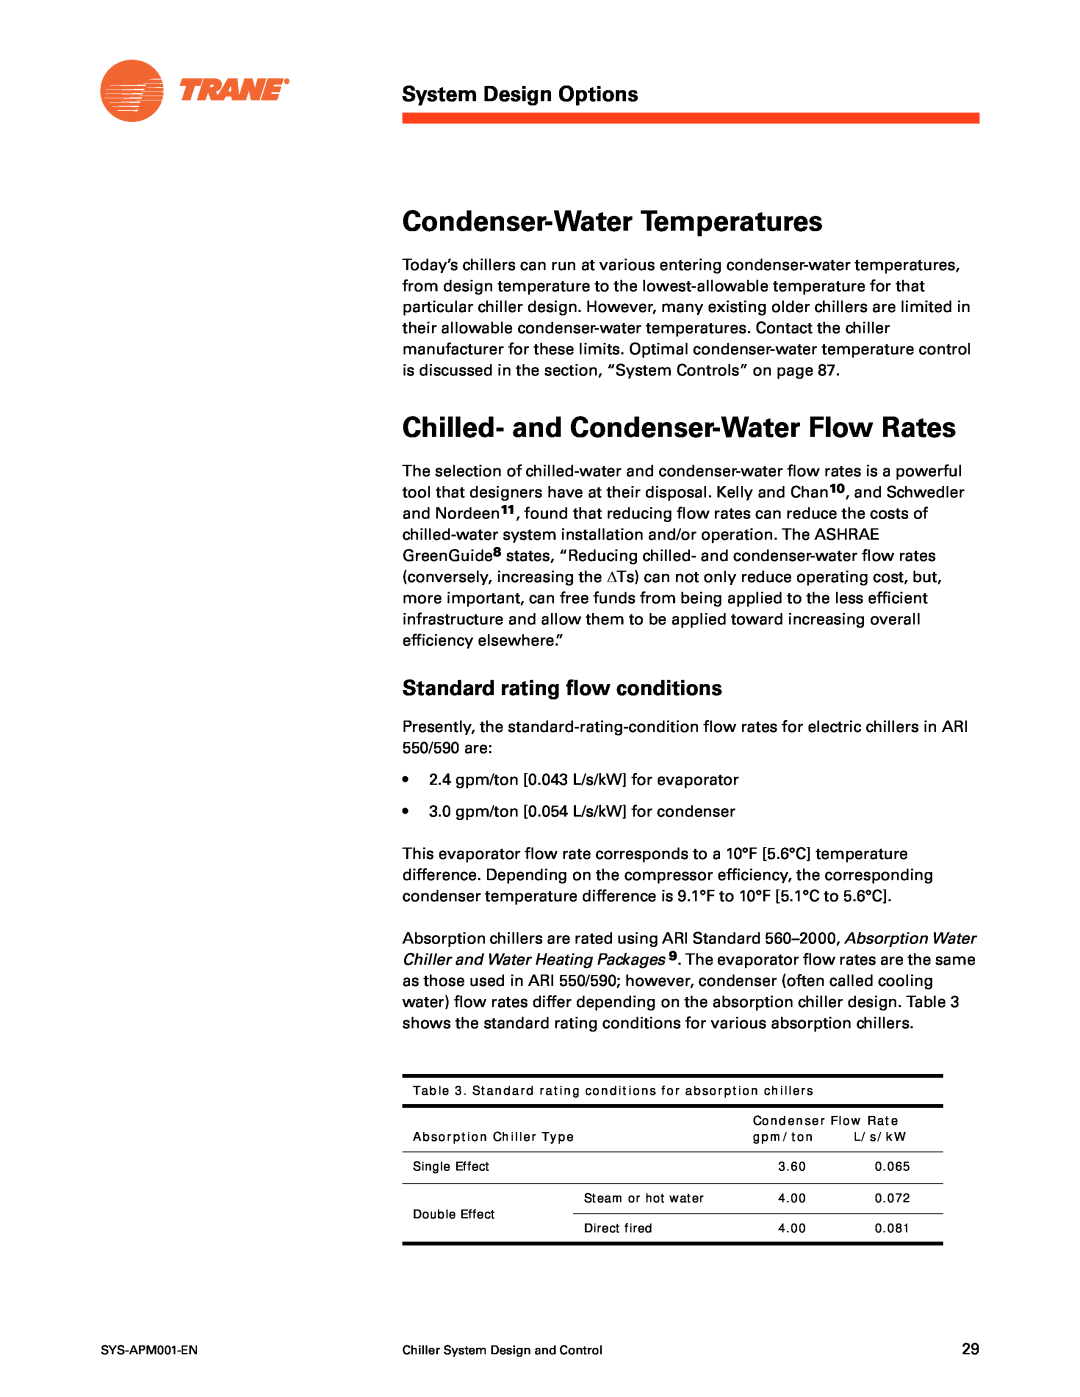 Trane SYS-APM001-EN Condenser-Water Temperatures, Chilled- and Condenser-Water Flow Rates, Standard rating flow conditions 